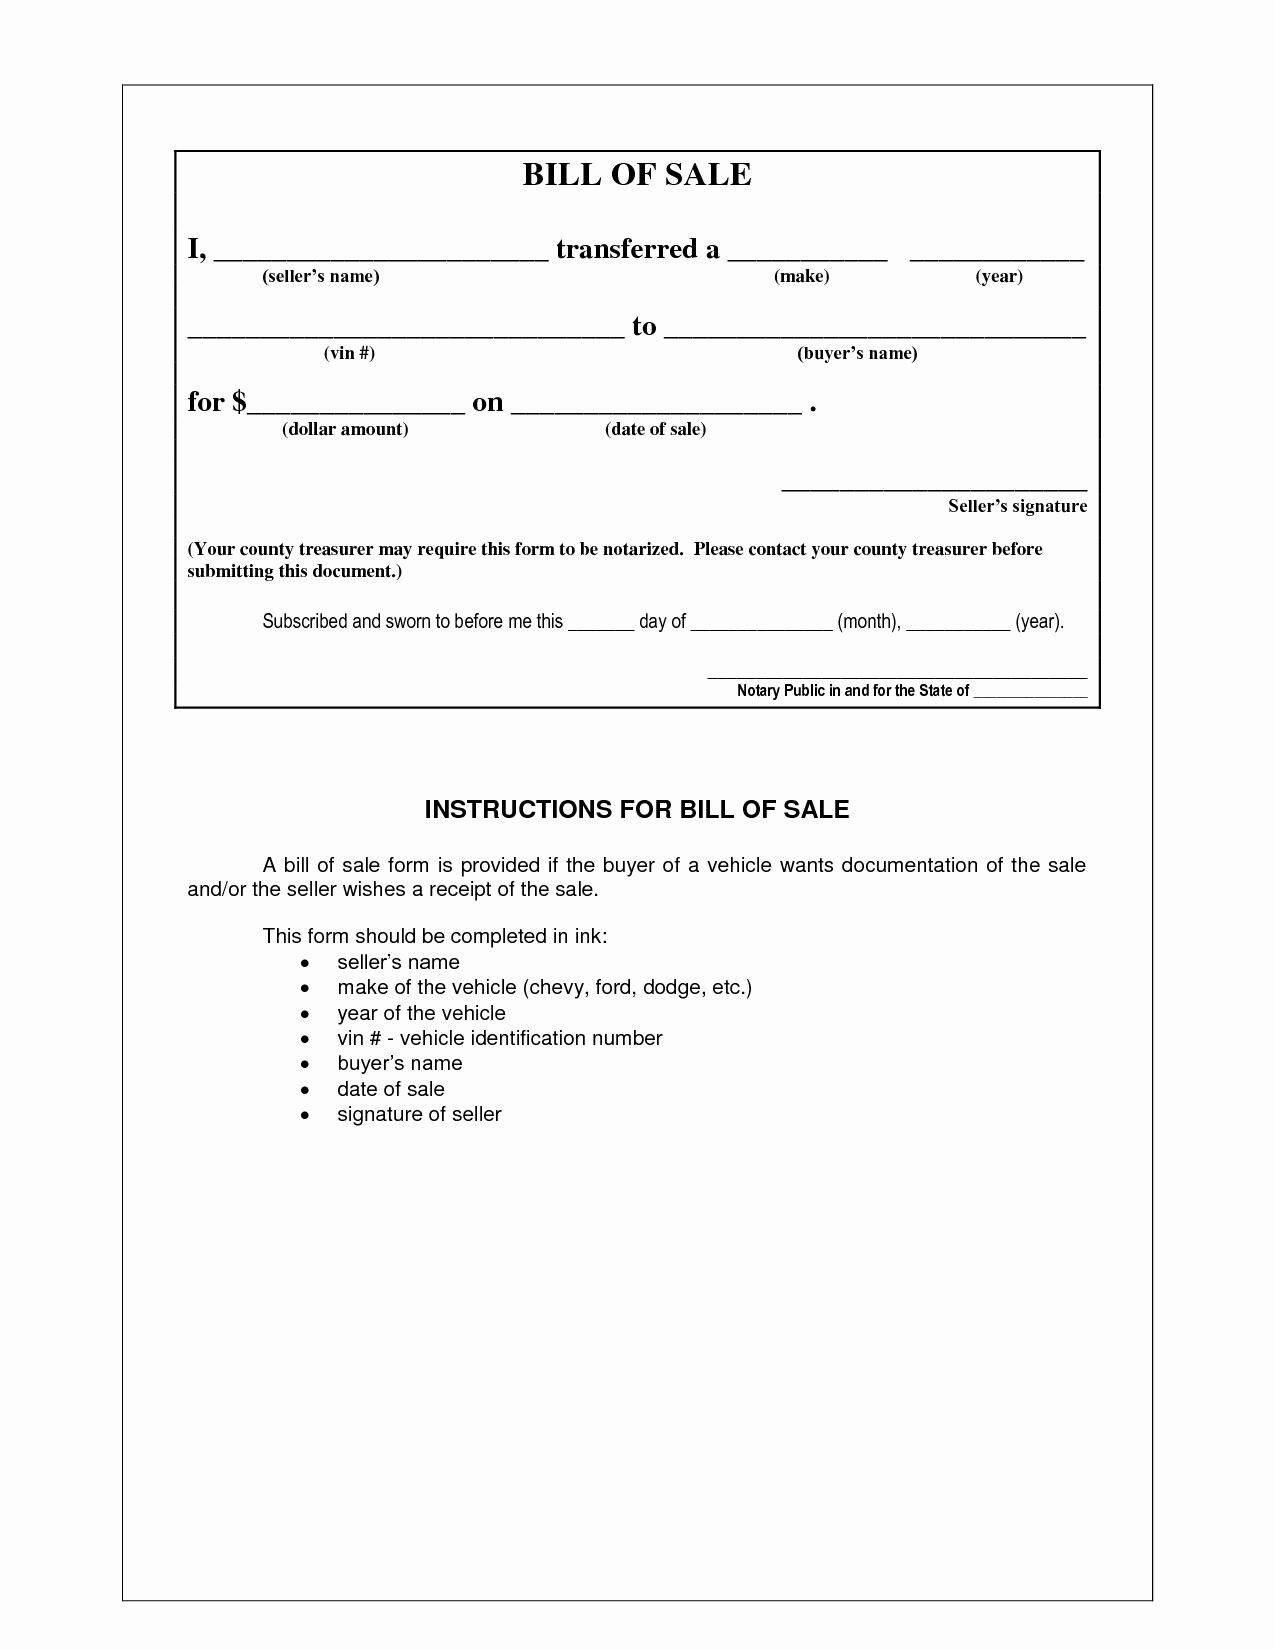 Bill Of Sale format Sample Elegant Picture 5 Of 17 Example Bill Sale form